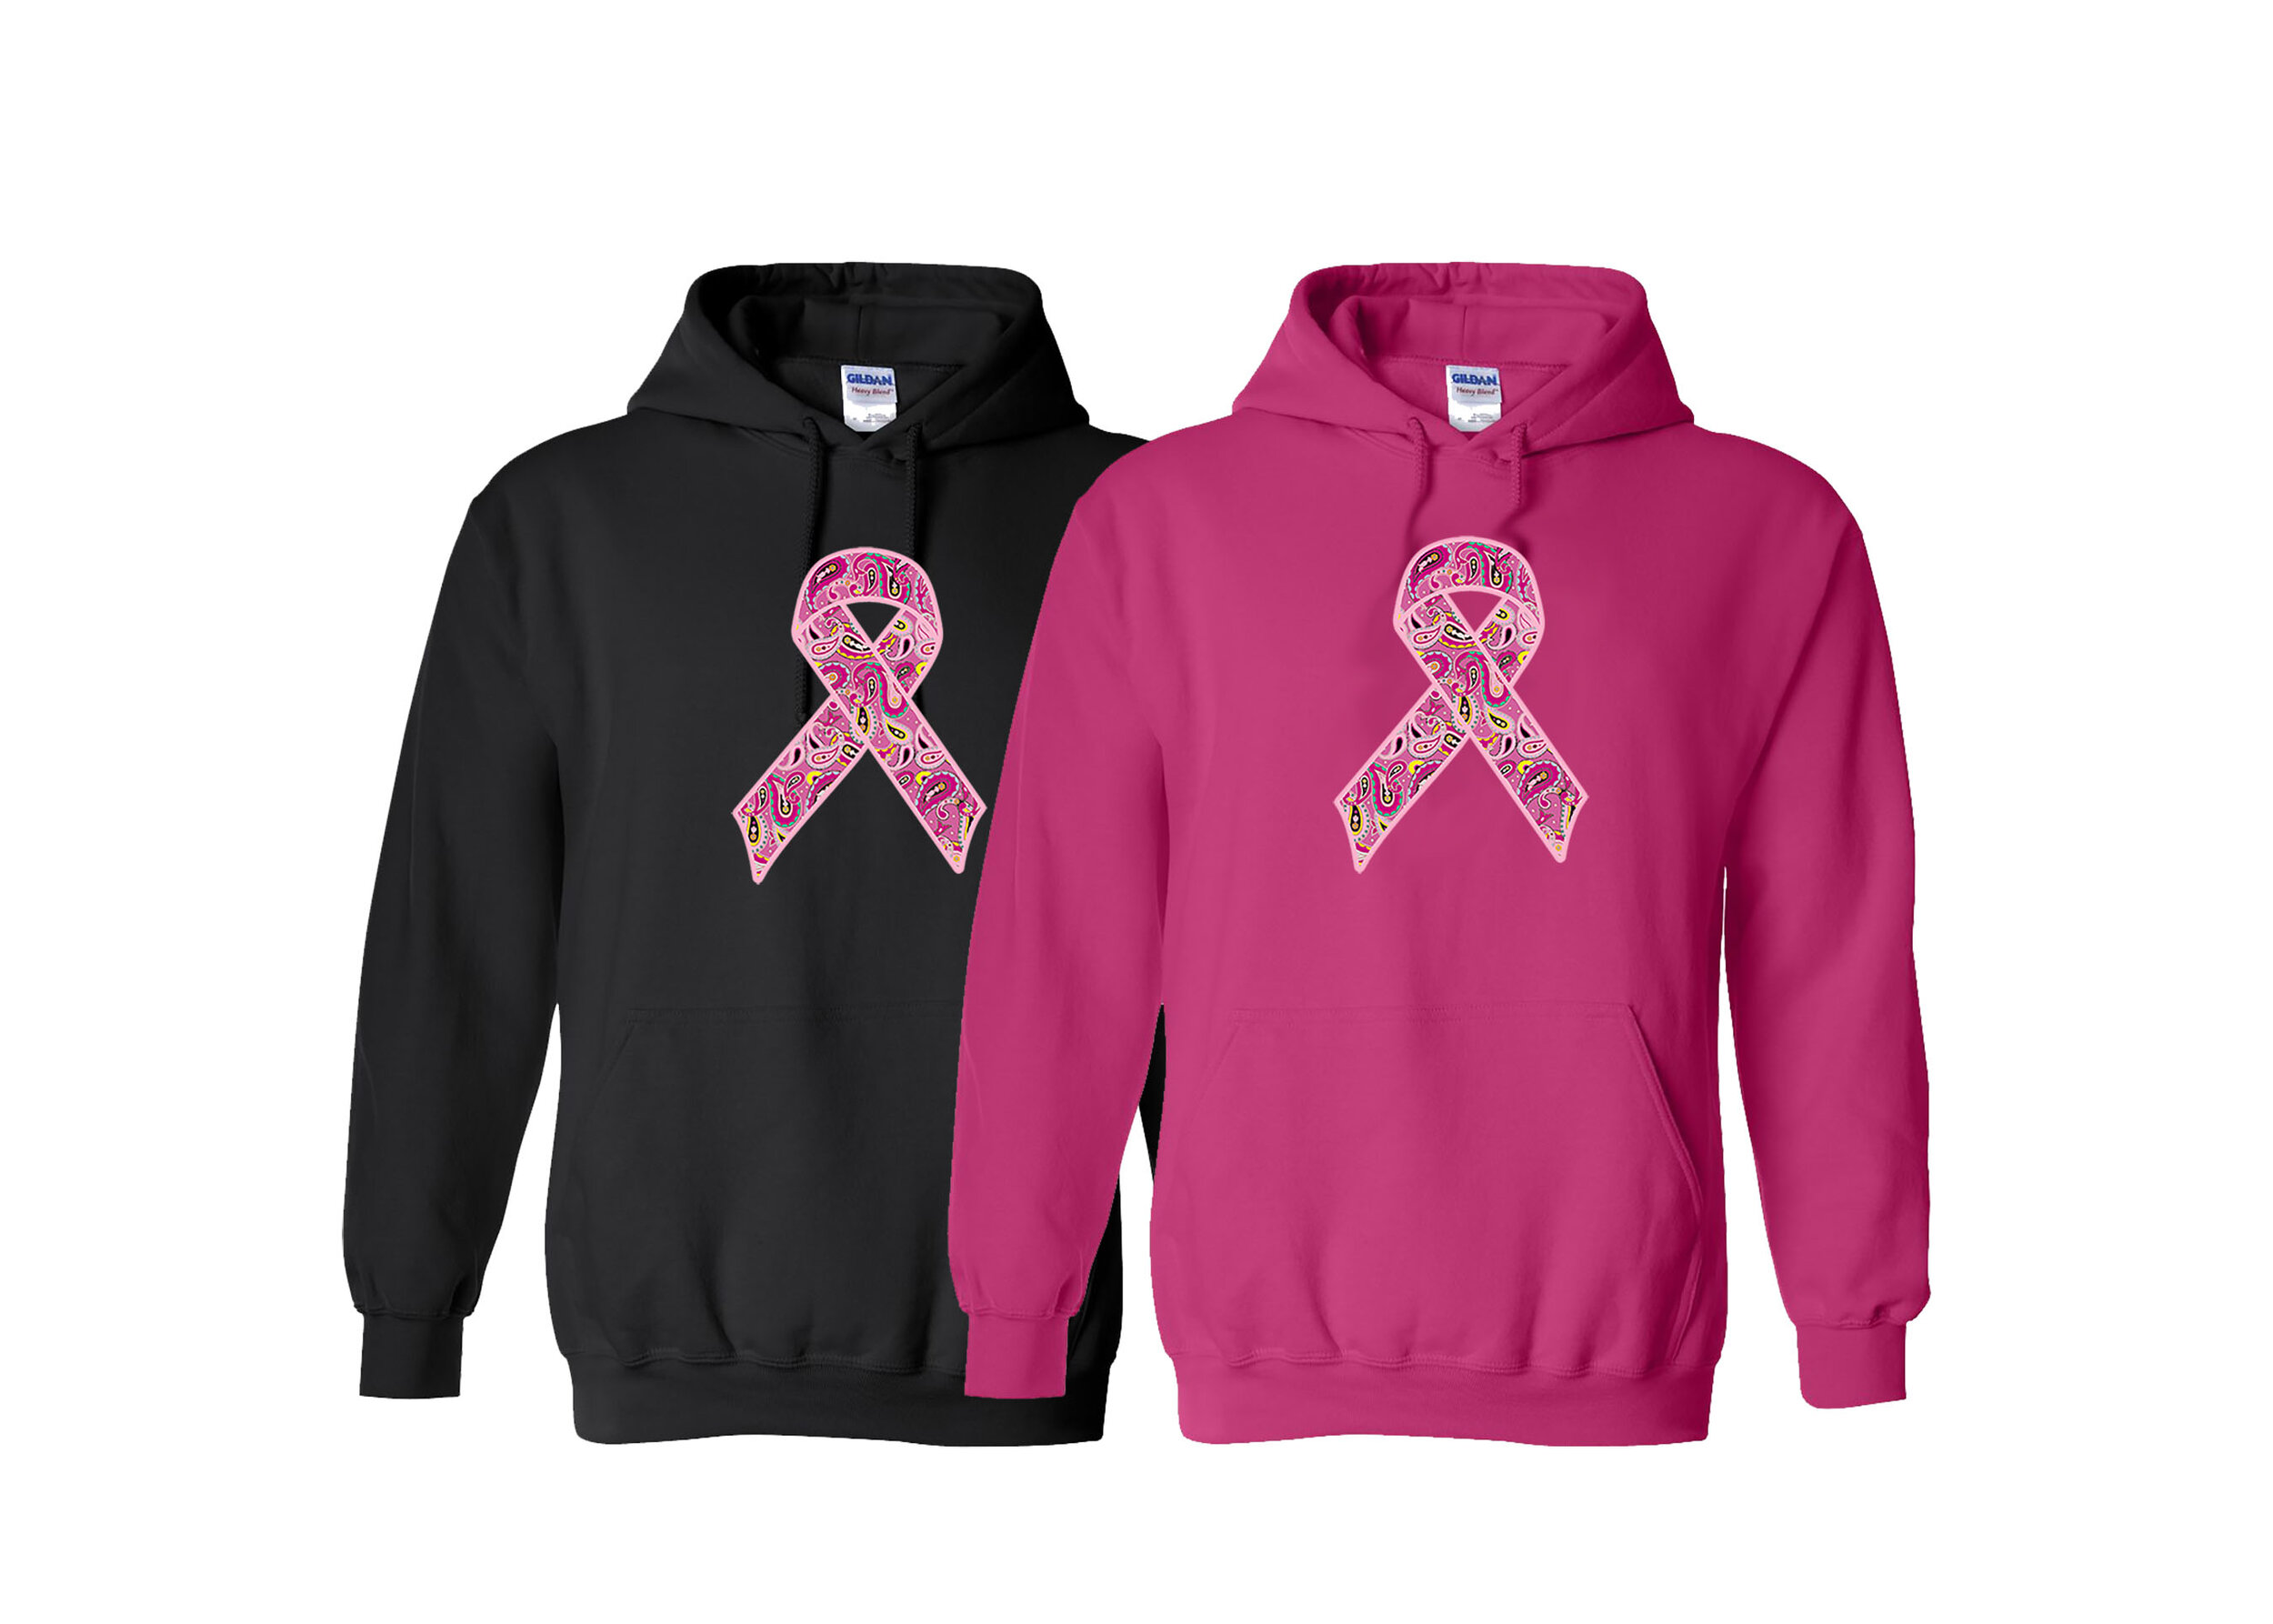  Breast Cancer Pink Ribbon Hoodies for Men Full Zip Up Sweater  Hooded Sweatshirt Tops Jackets Outwear S : Sports & Outdoors